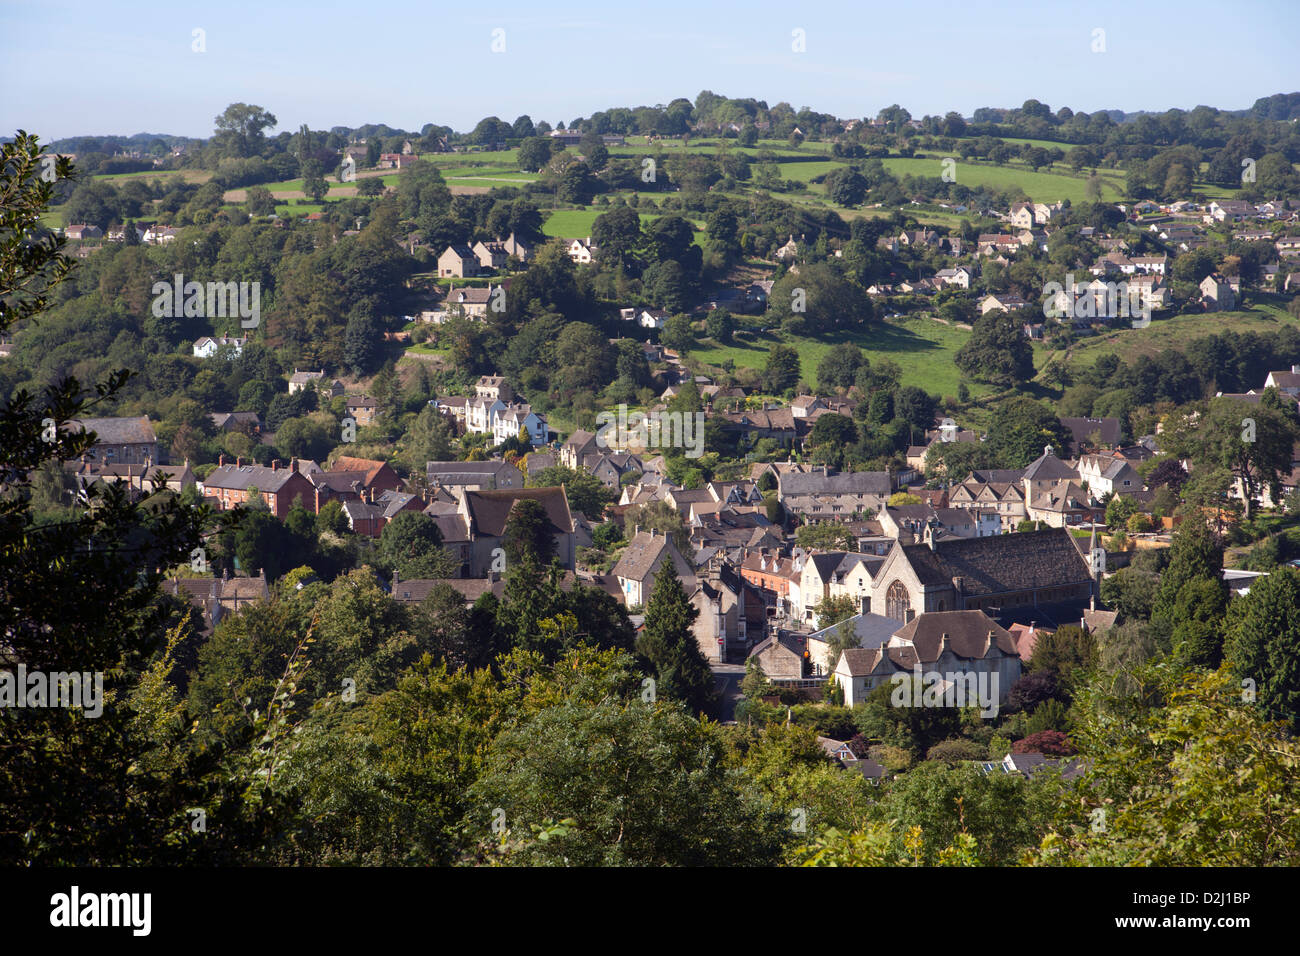 The view over Nailsworth town nestled in its valley on the edge of the Cotswolds, Gloucestershire, UK Stock Photo